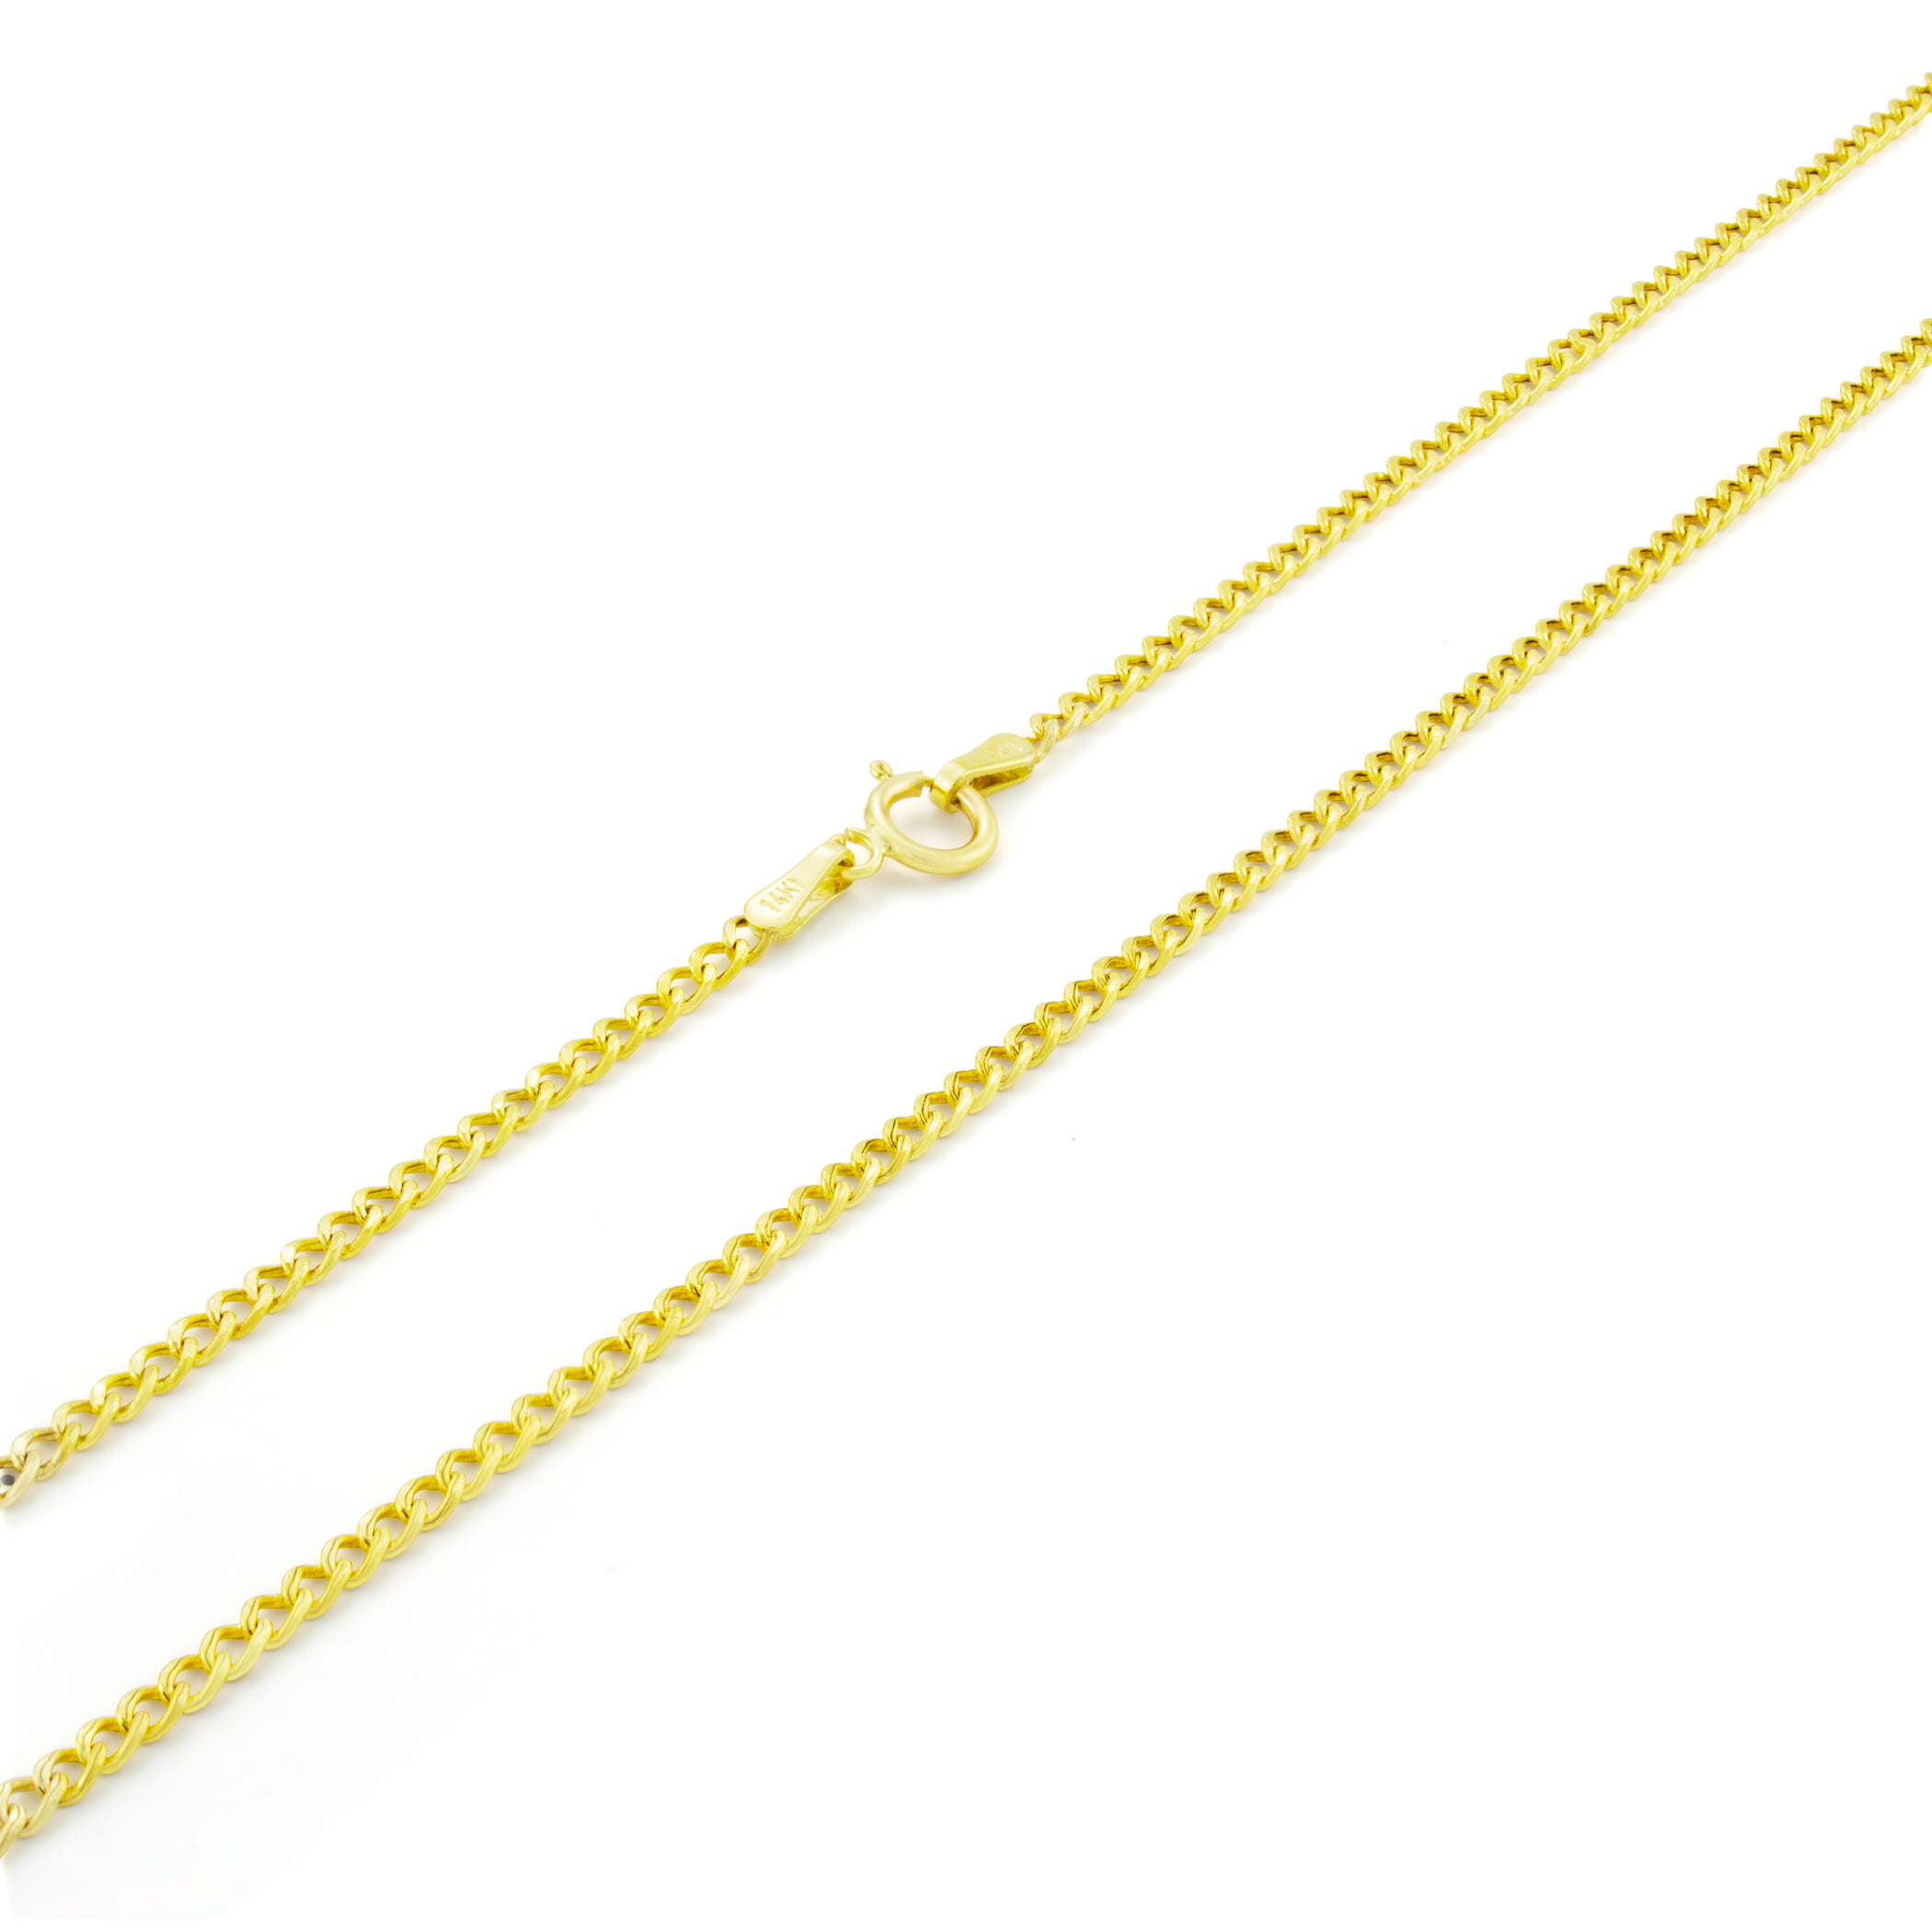 Wellingsale 14k Yellow Gold Solid 2.1mm Classic Rolo Chain Necklace